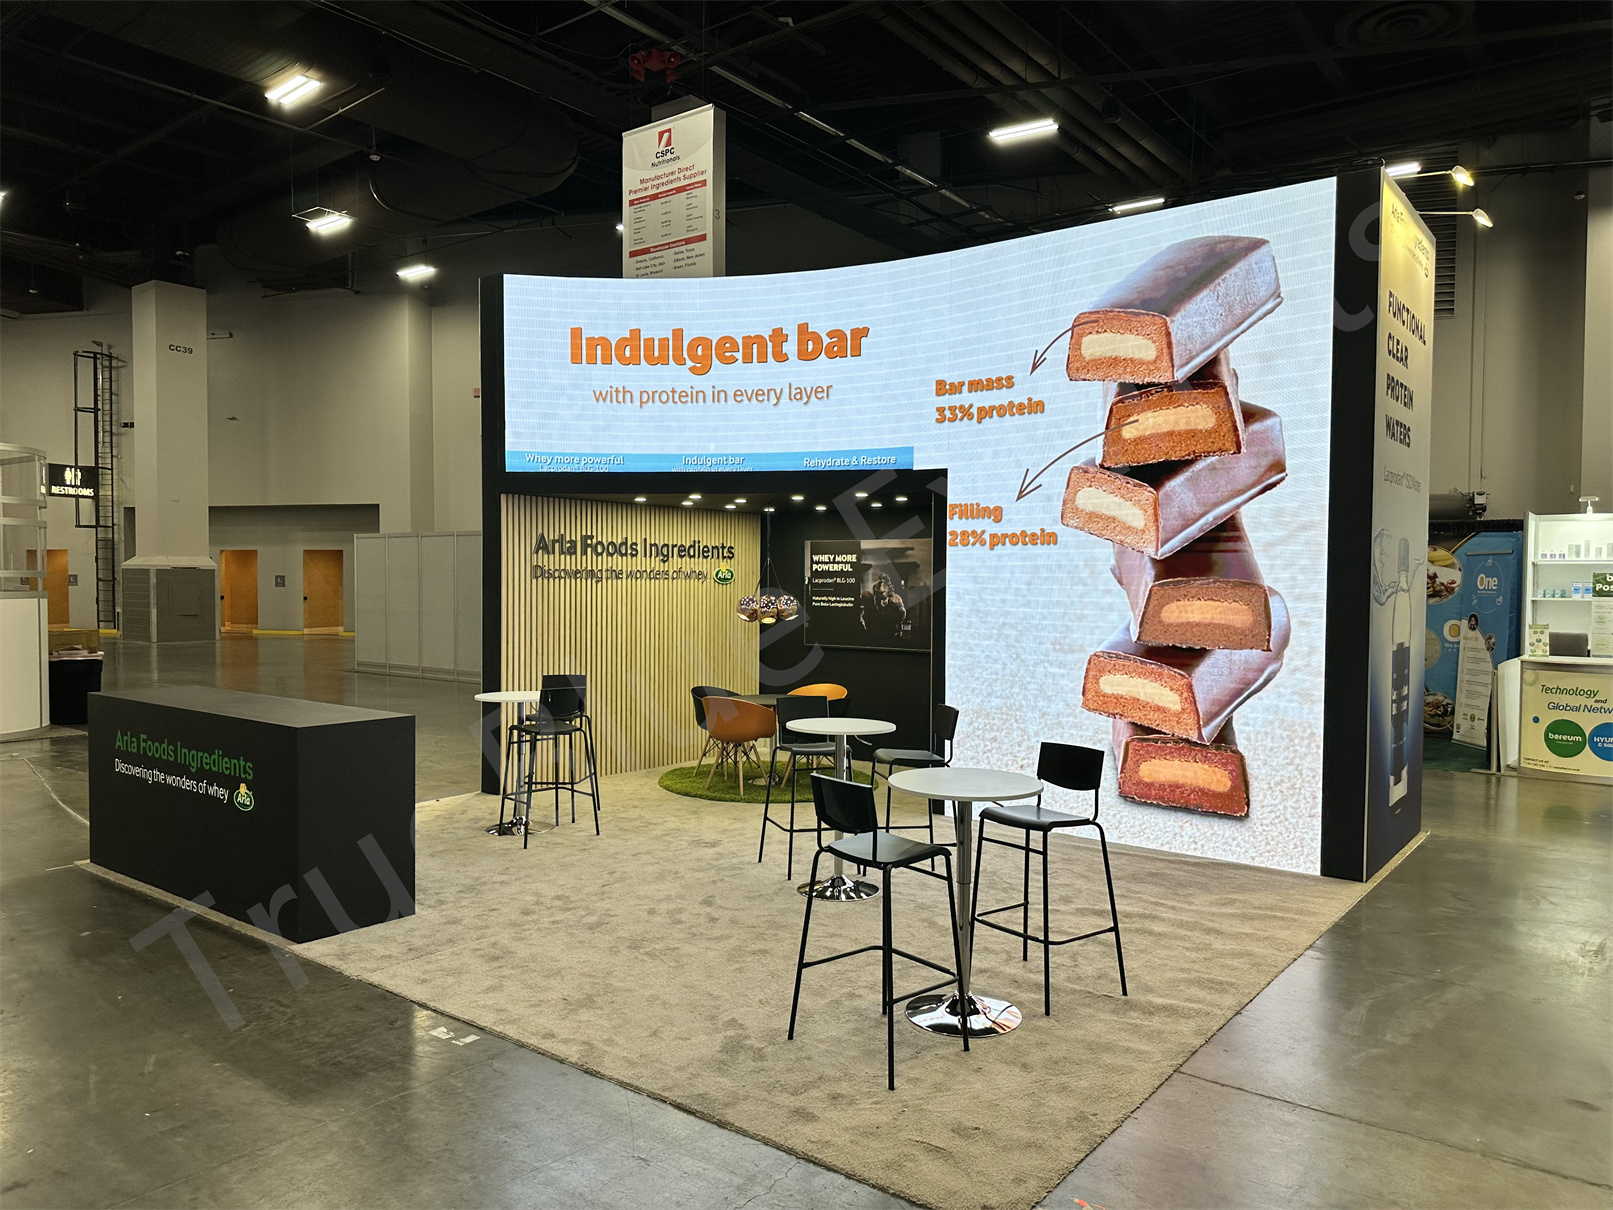 Arla SupplySide West 20' x 20' Curved LED Video Wall Booth